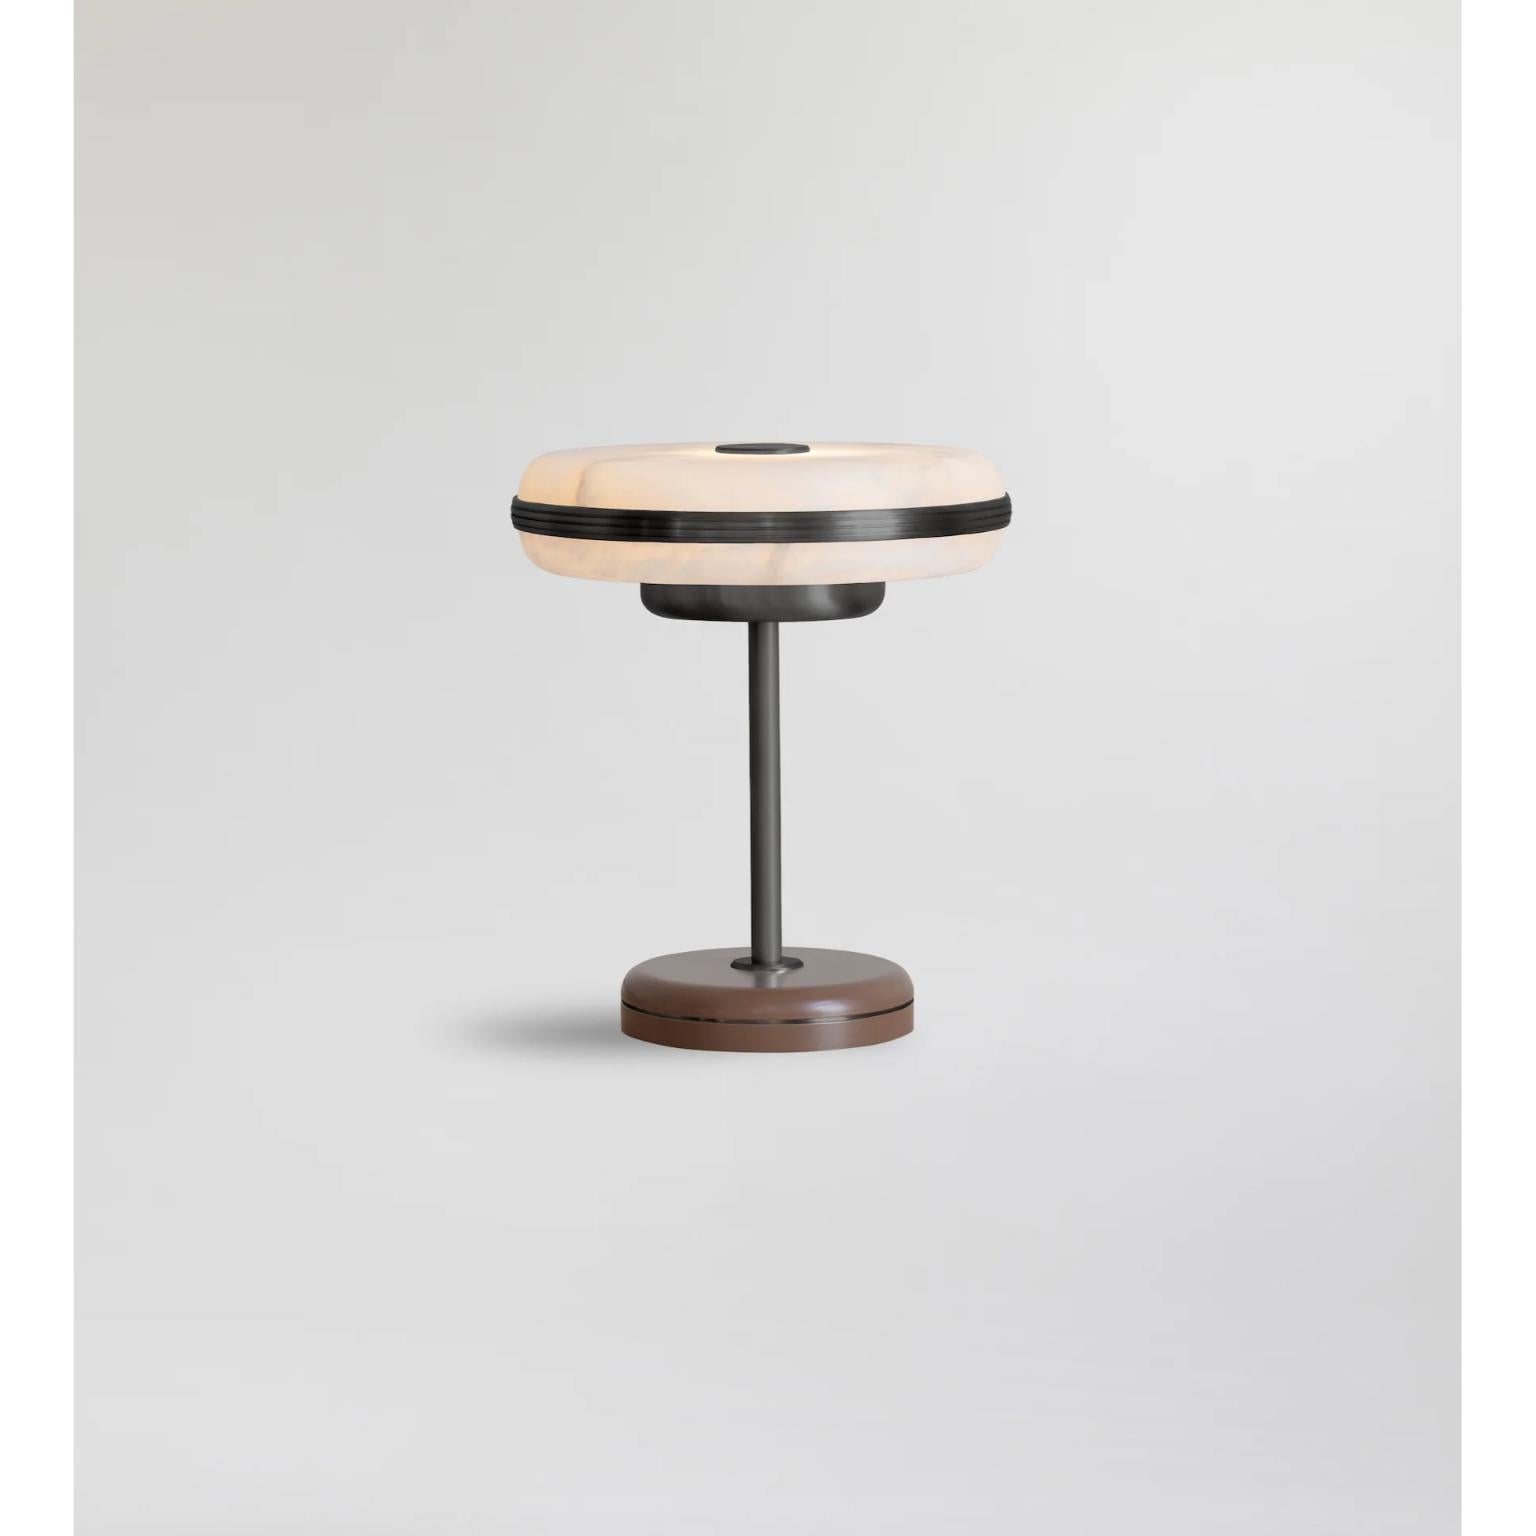 Beran Dark Bronze Small Table Lamp by Bert Frank
Dimensions: Ø 26 x H 28 cm.
Materials: Bronze and alabaster.
Base finish: Hazel.

Available in two different sizes. Available in different finishes and materials. Please contact us. 

The natural